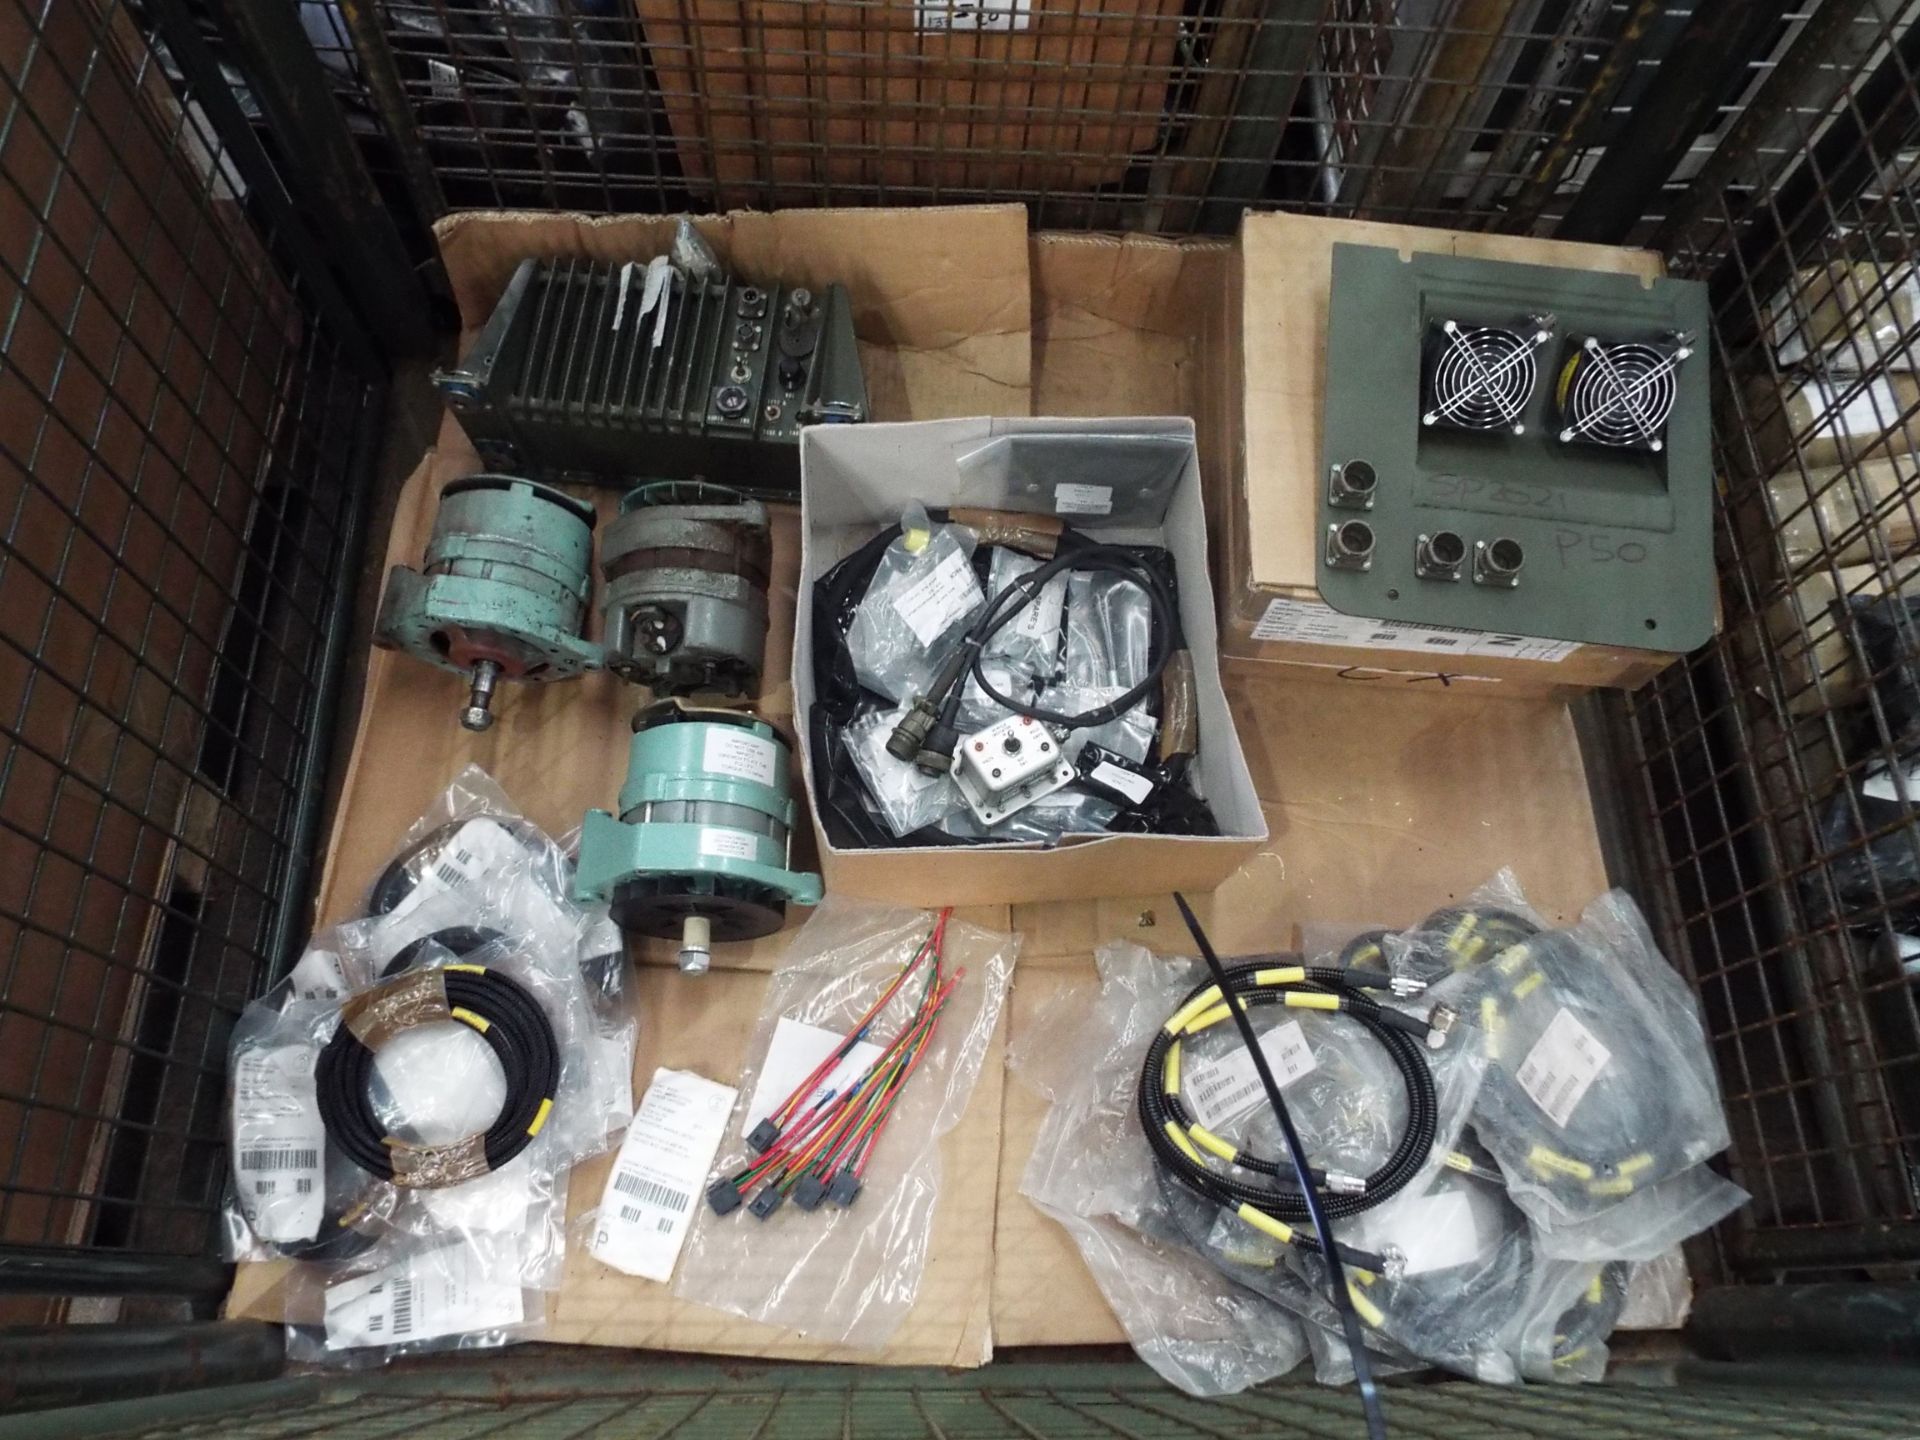 Mixed Stillage of Electrical Parts inc Alternators, Wiring Harness', Power Supply, Cables etc